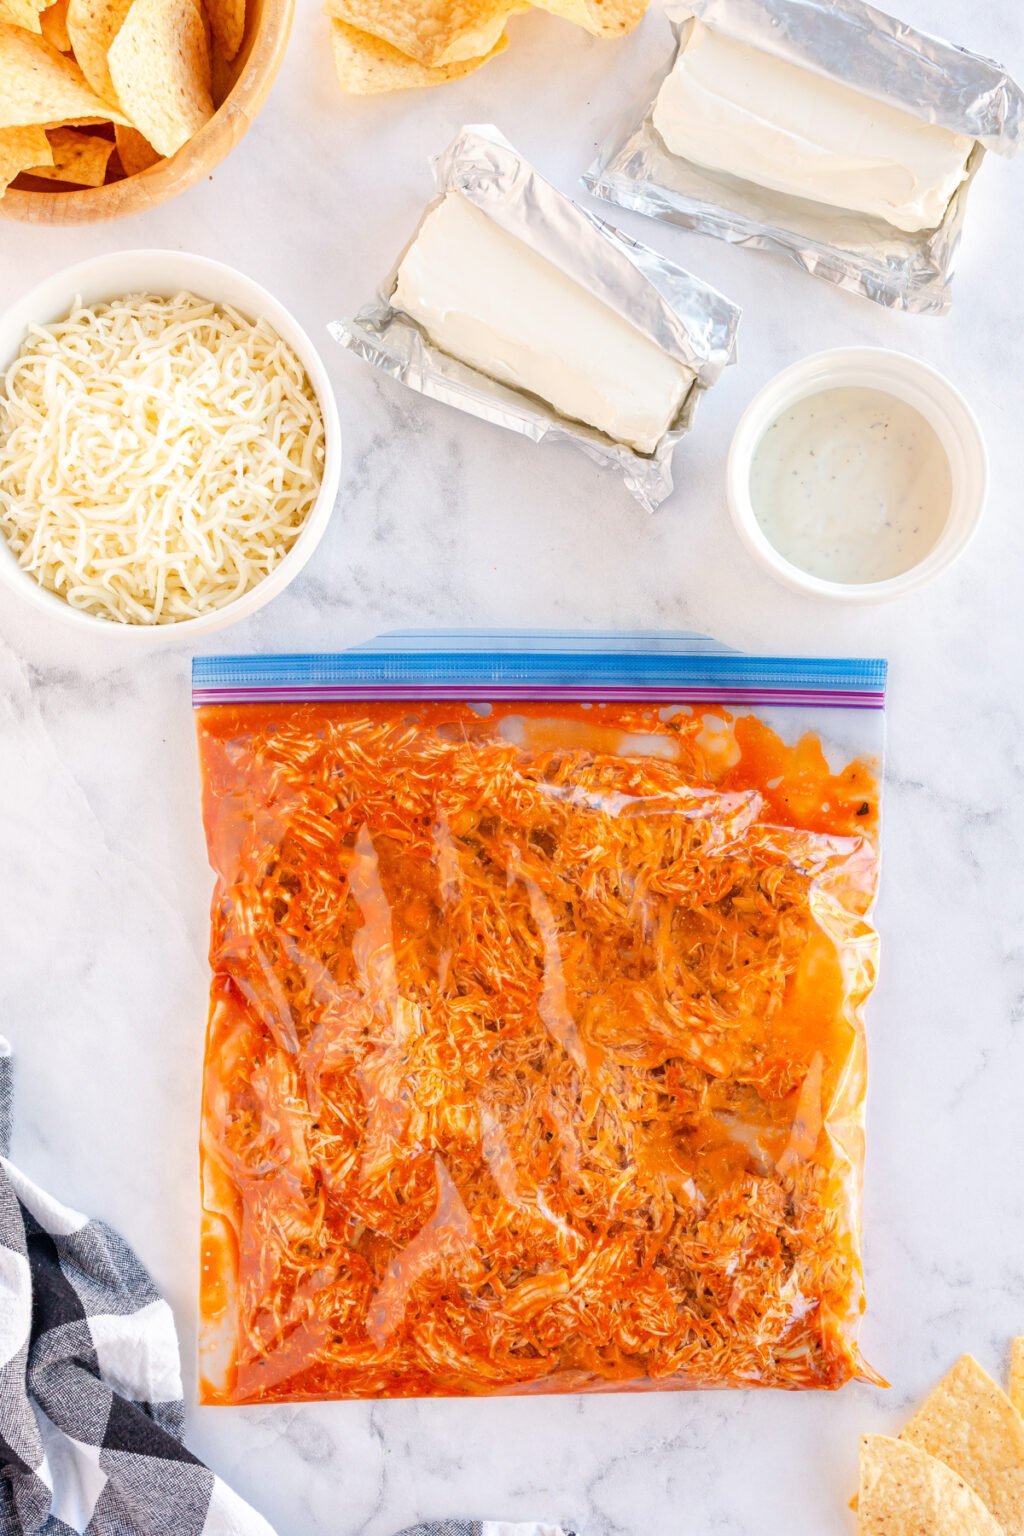 The Best Baked Buffalo Chicken Dip - Play Party Plan